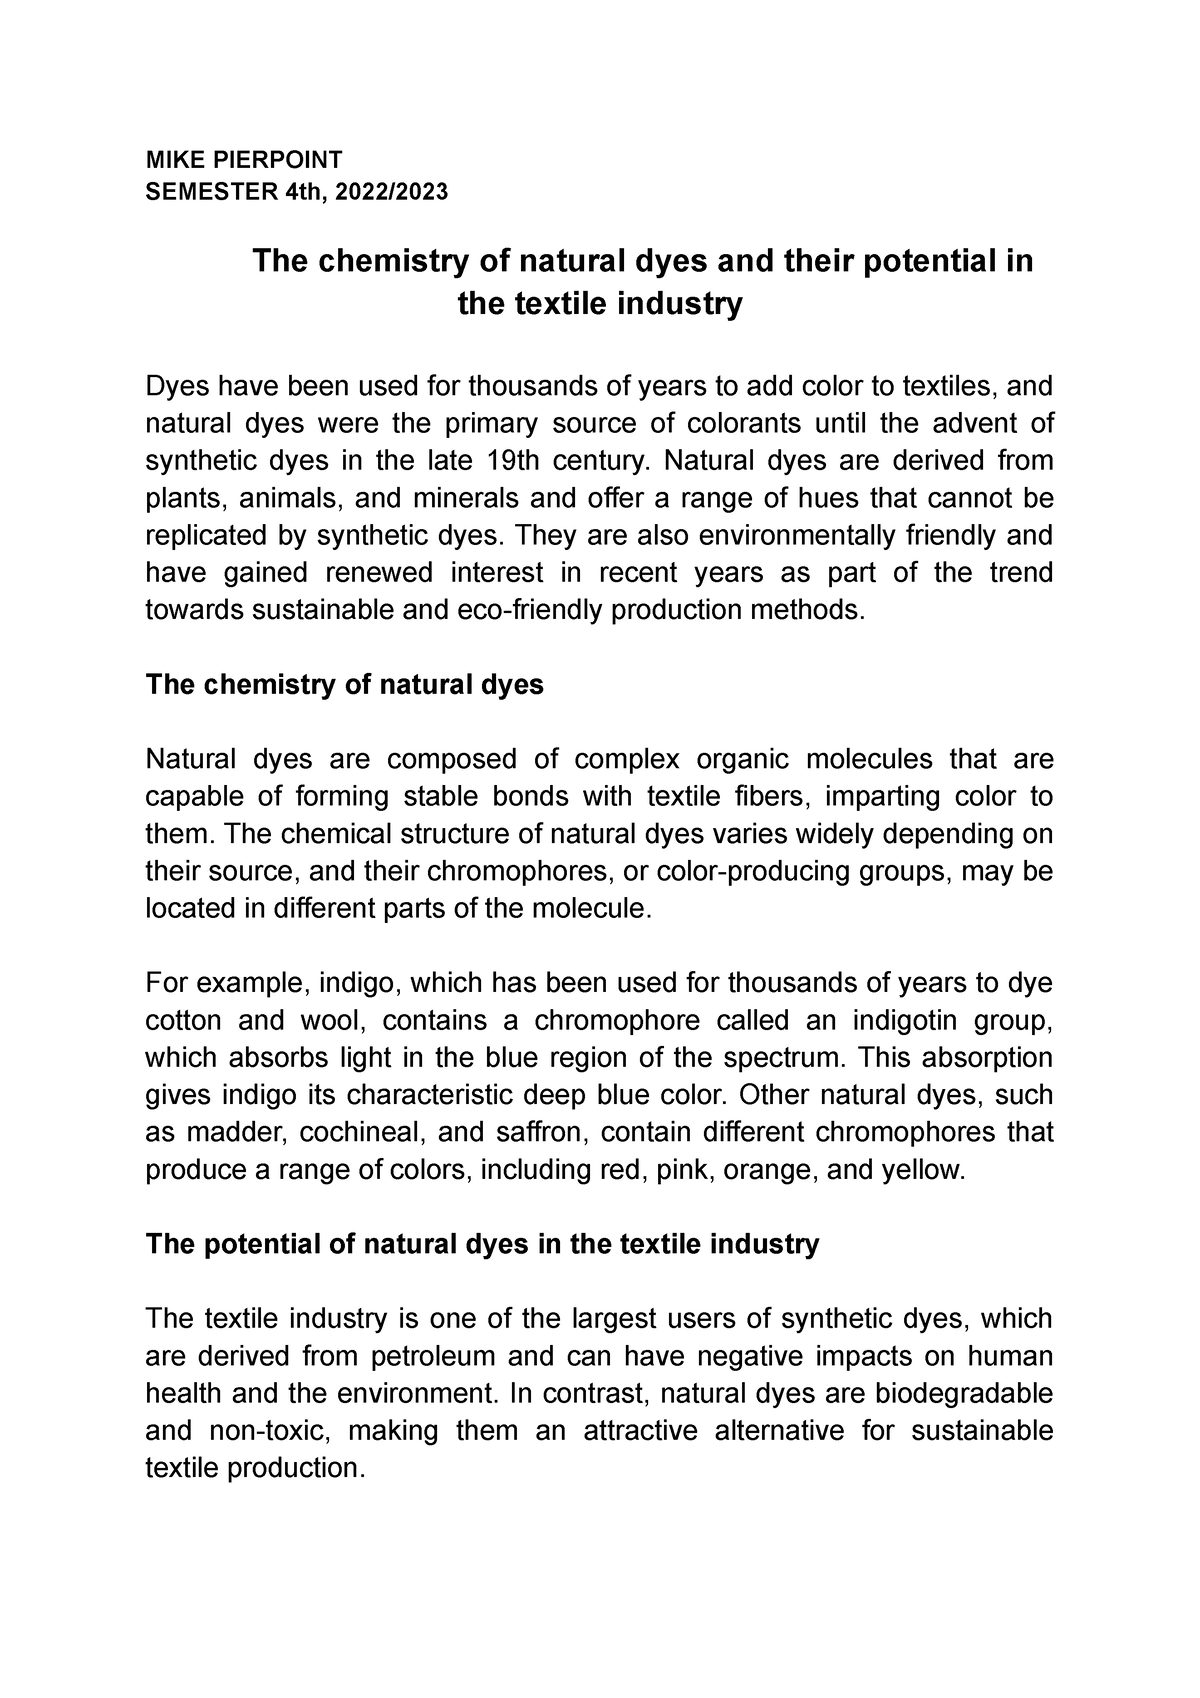 research papers on natural dyes